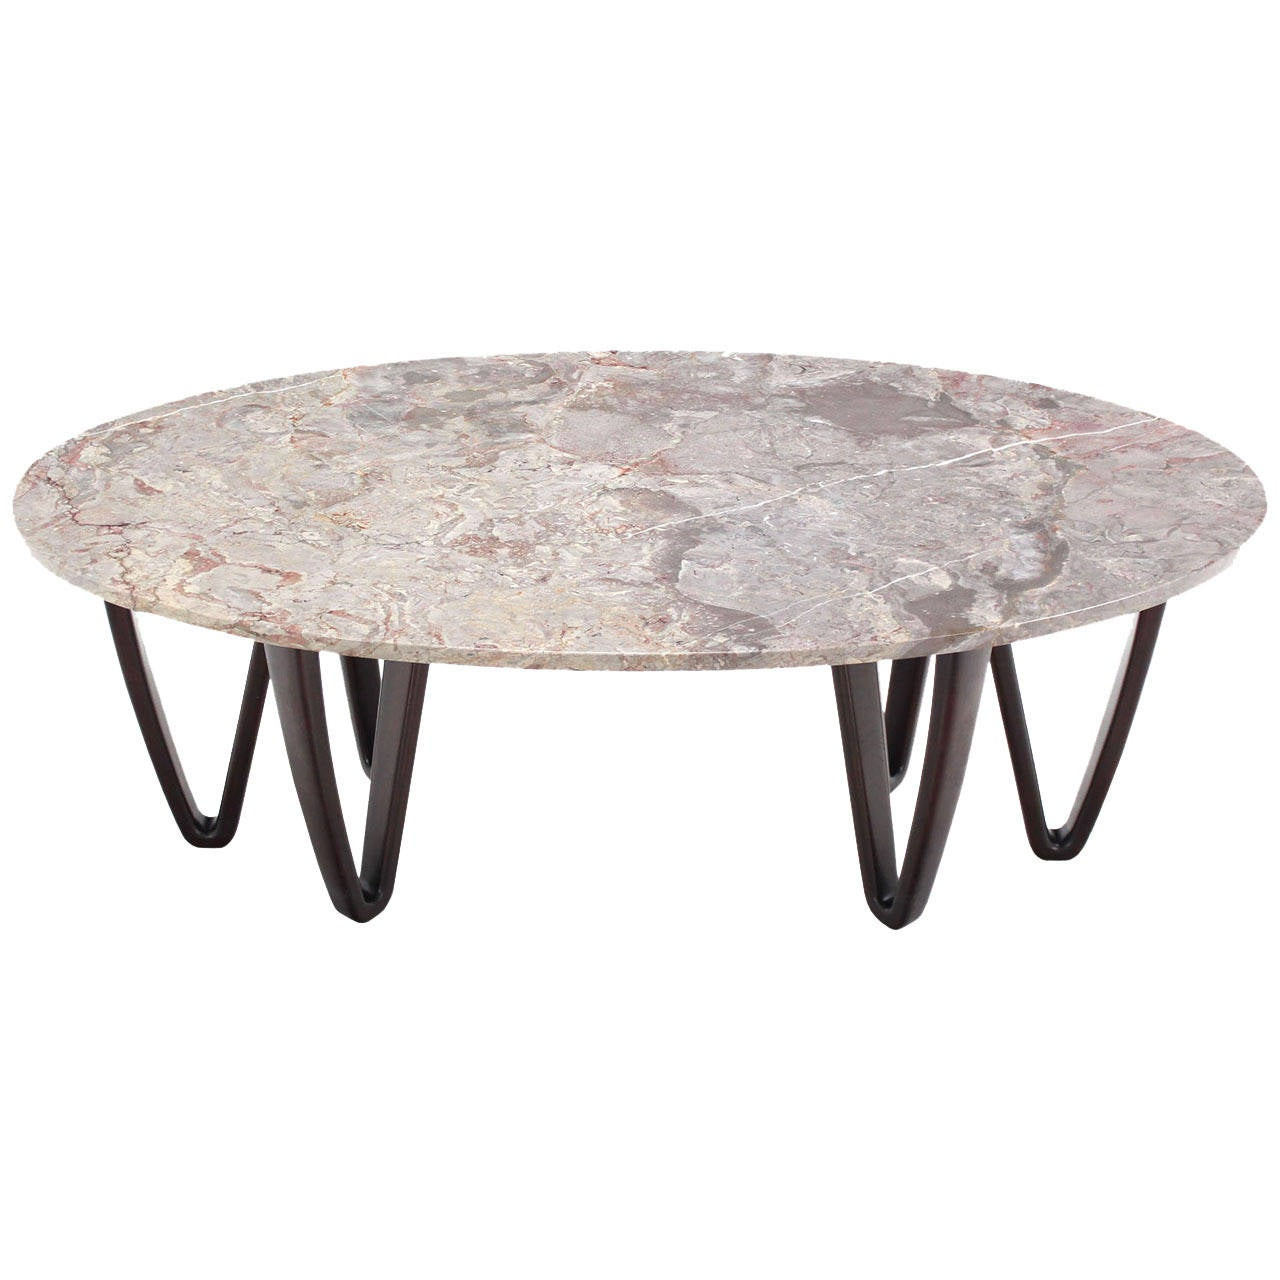 Oval Marble Top Coffee Table On Wooden Hair Pin Legs At 1stdibs throughout dimensions 1280 X 1280